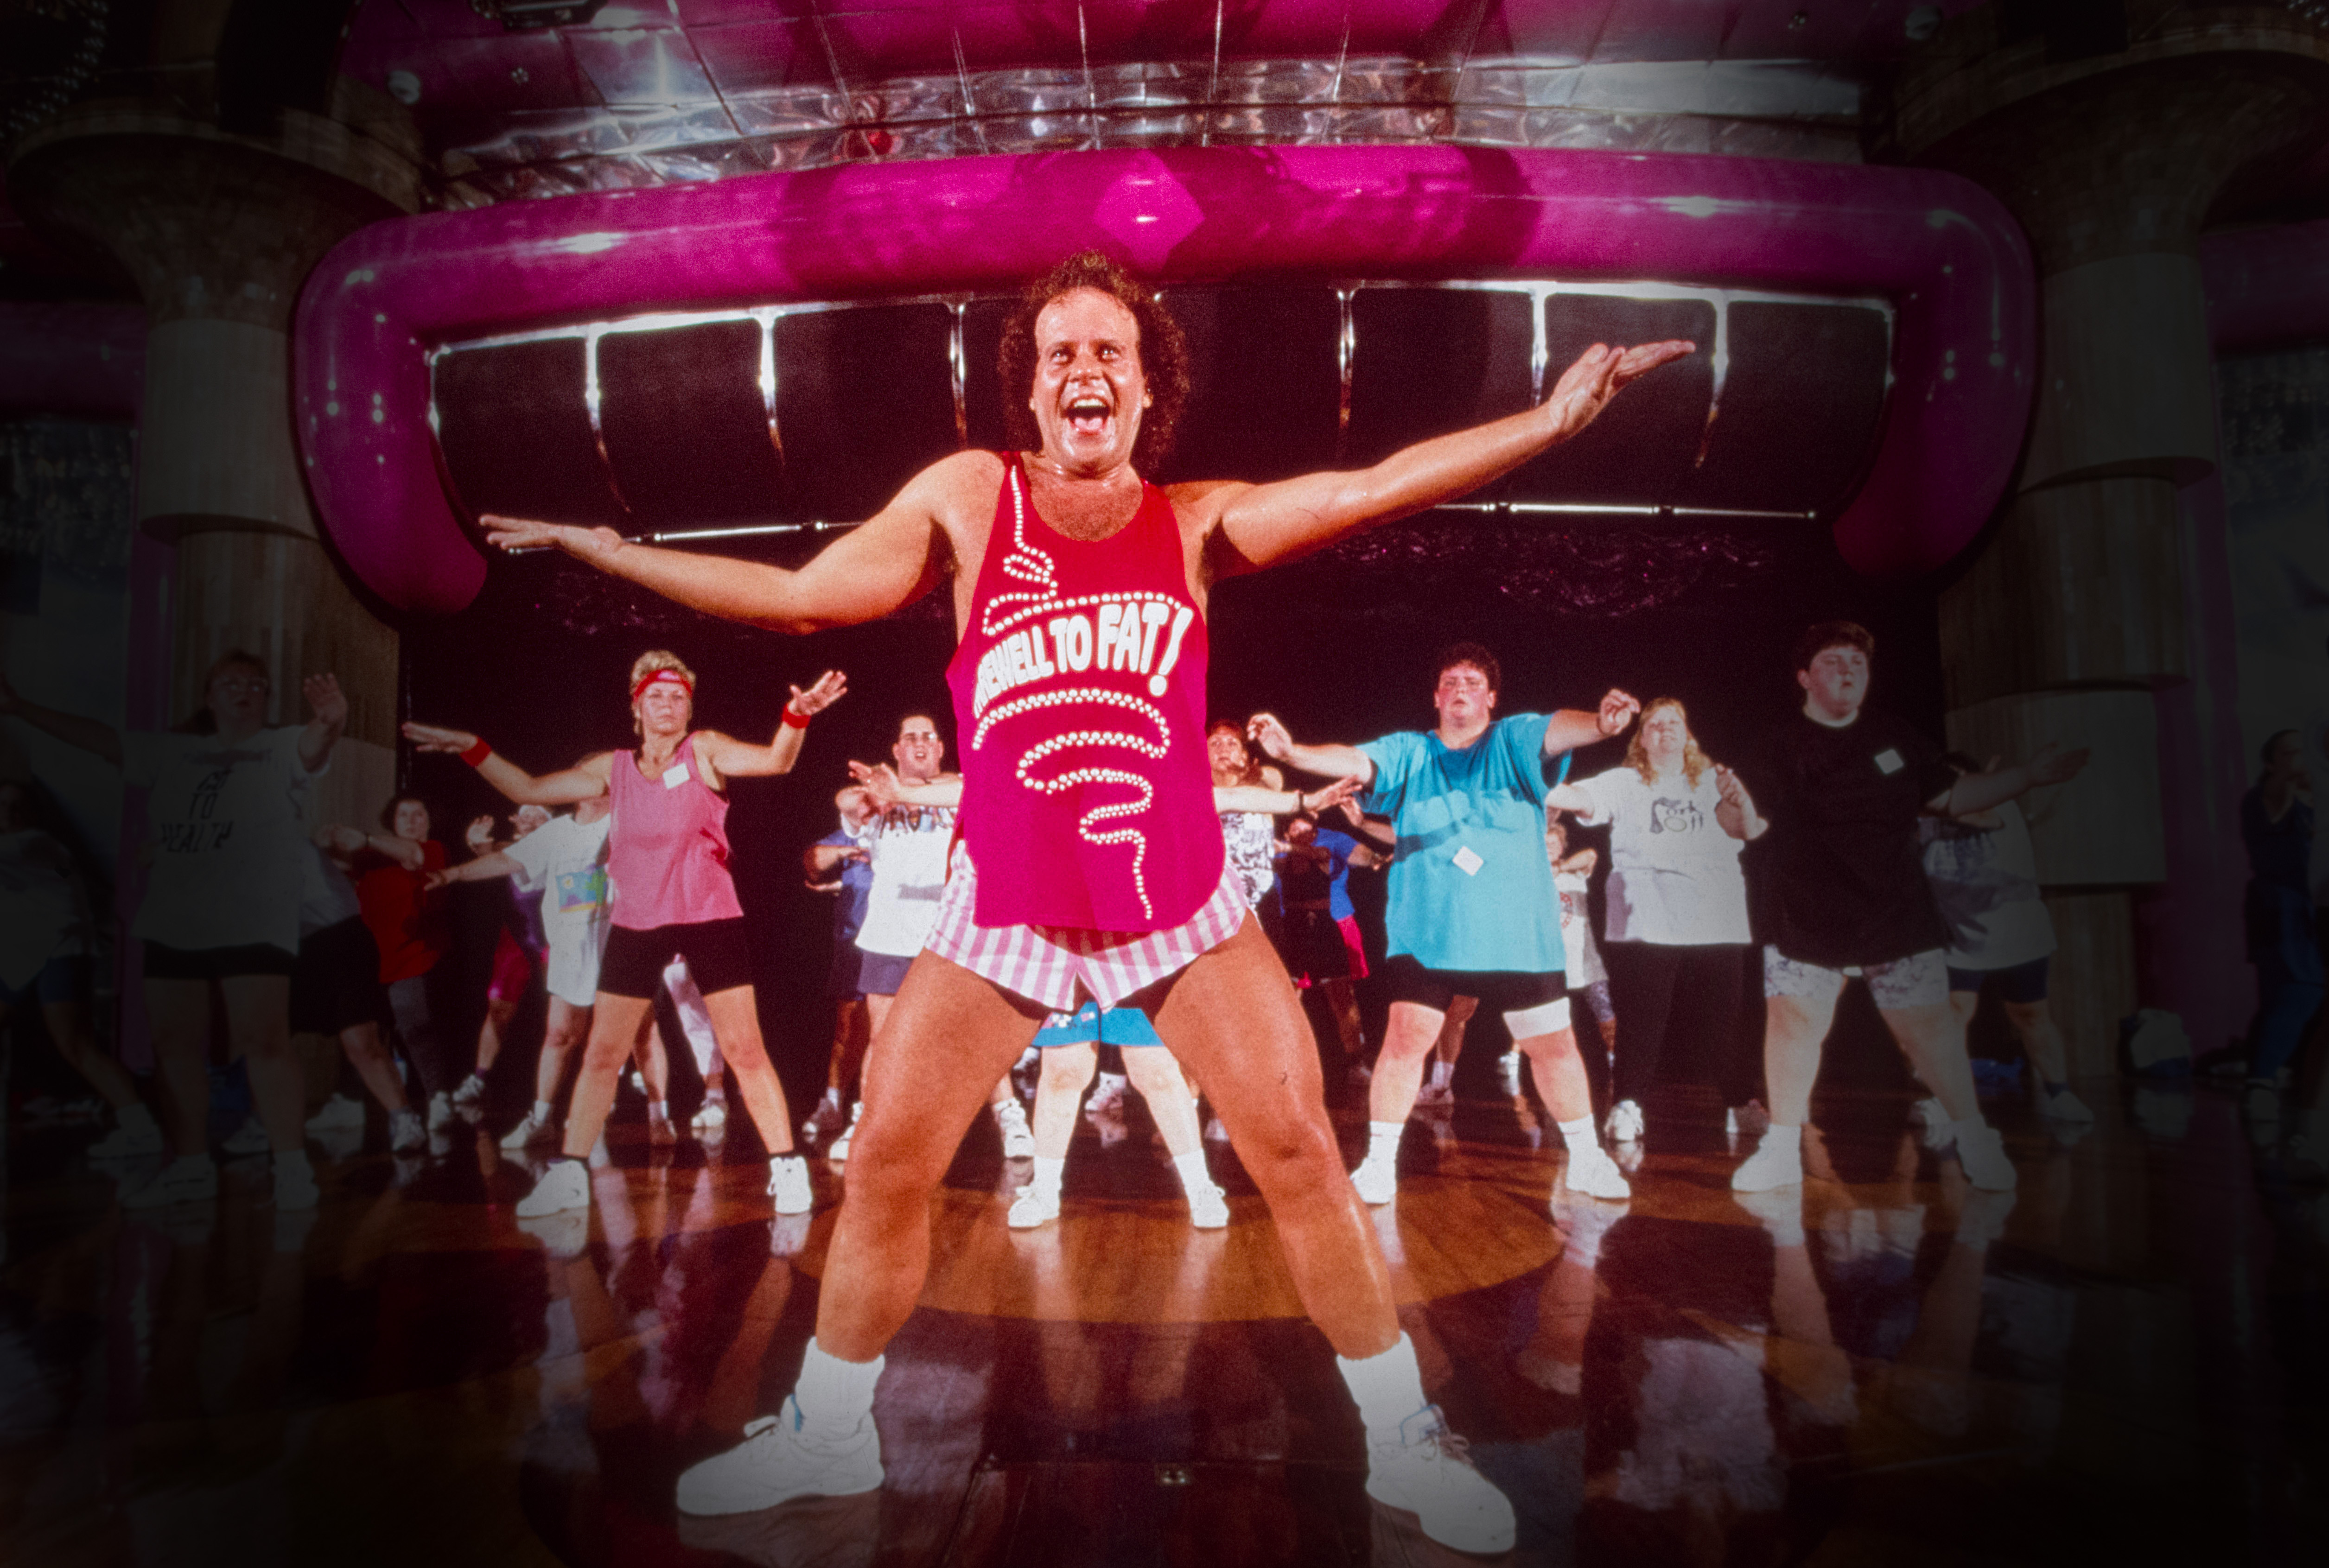 Richard Simmons teaches during his ’Cruise to Lose’.